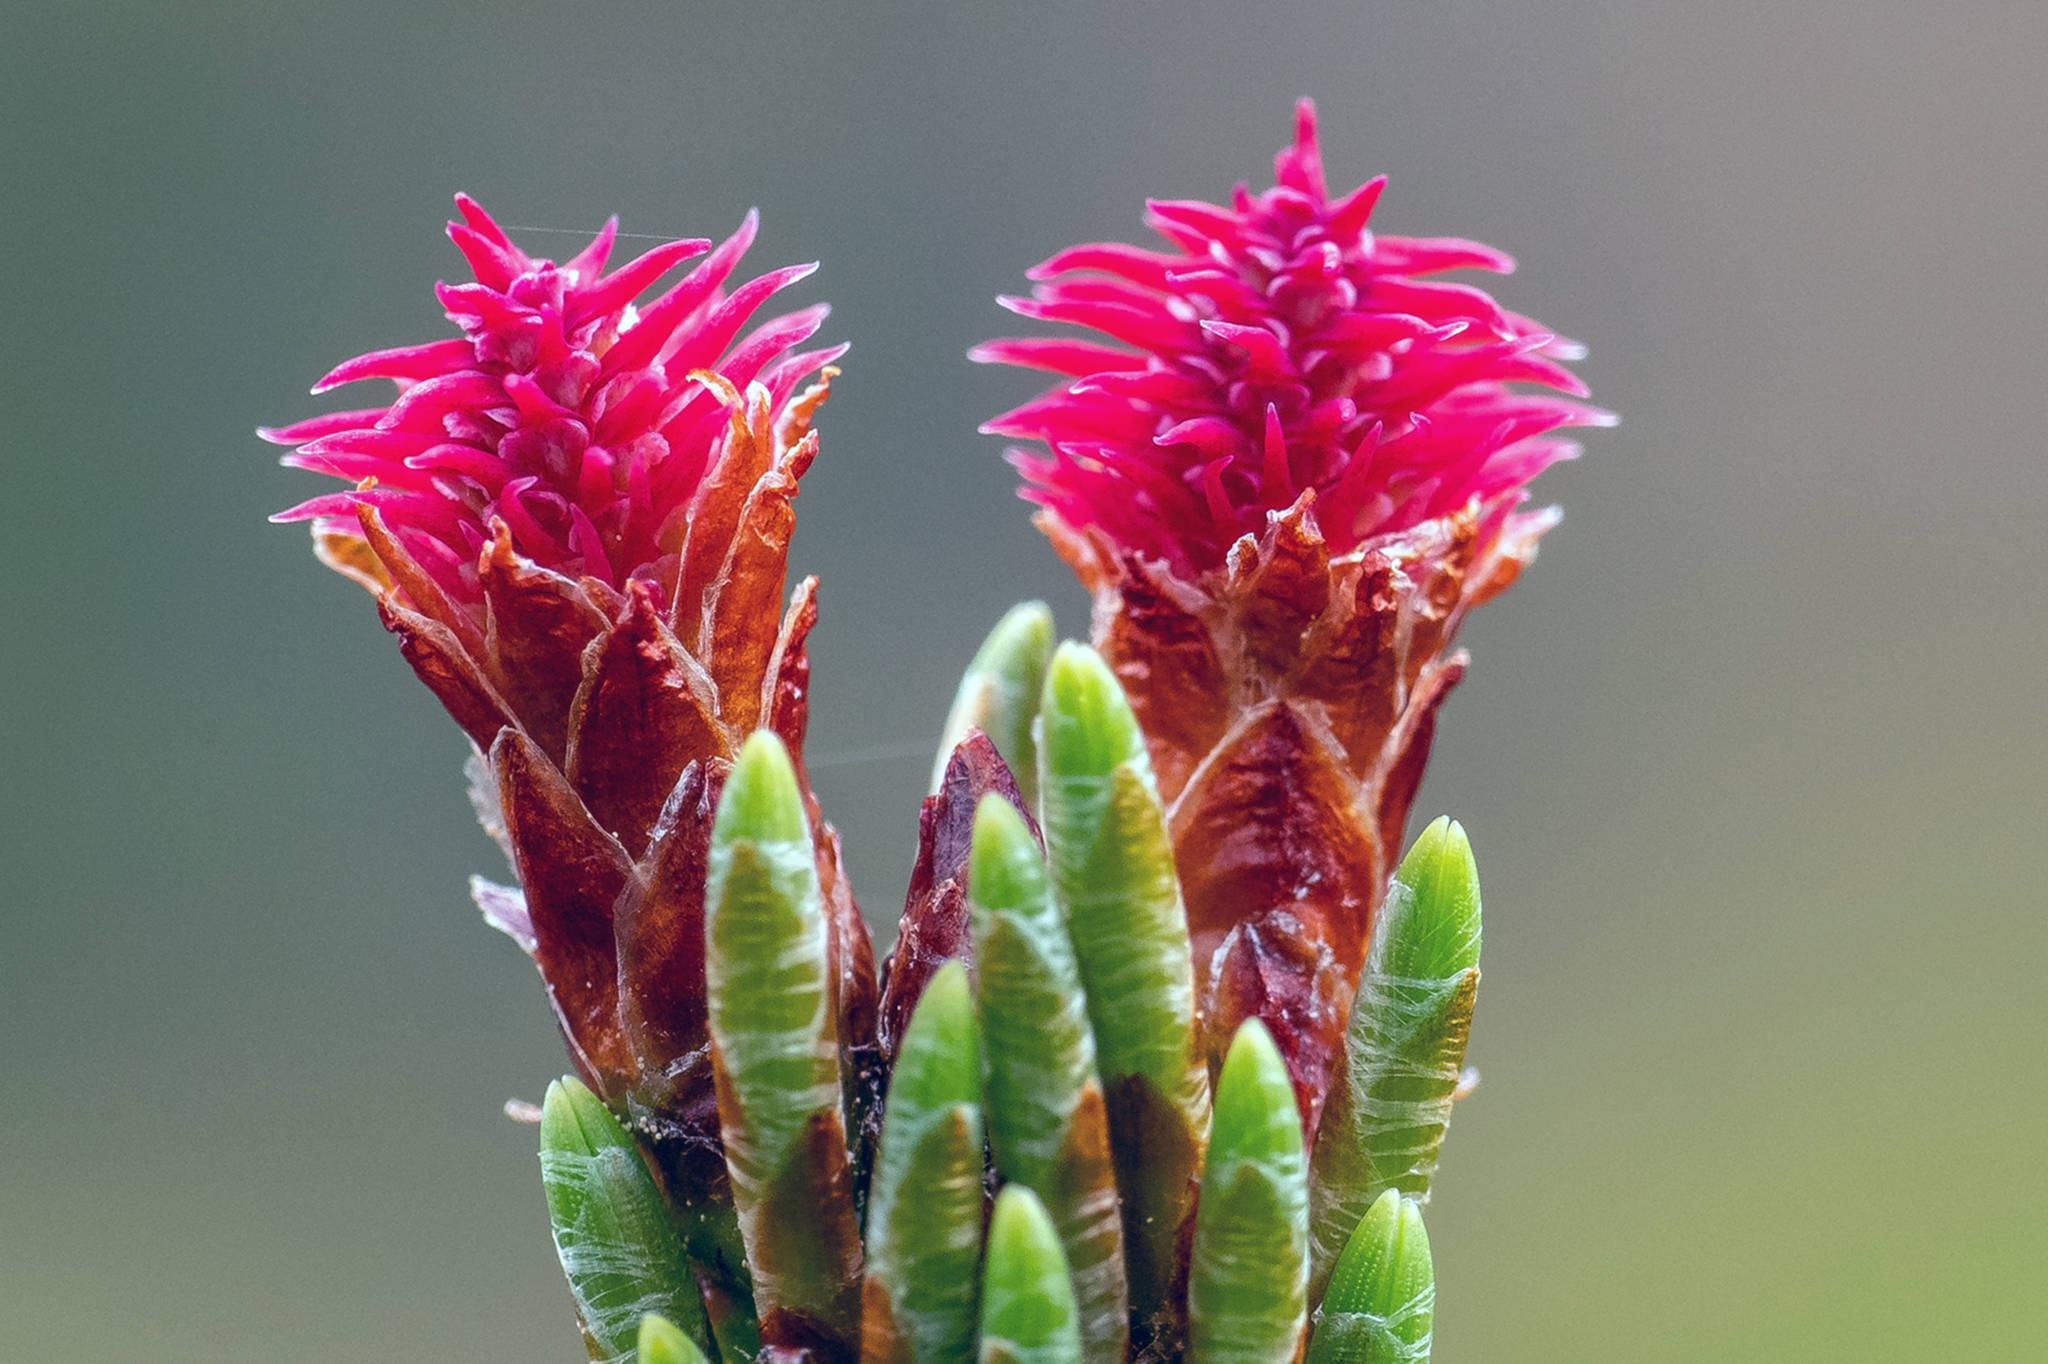 New seed cones of shore pines begin as little red rosettes on the tips of young twigs, June 5. (Courtesy photo | Kerry Howard)